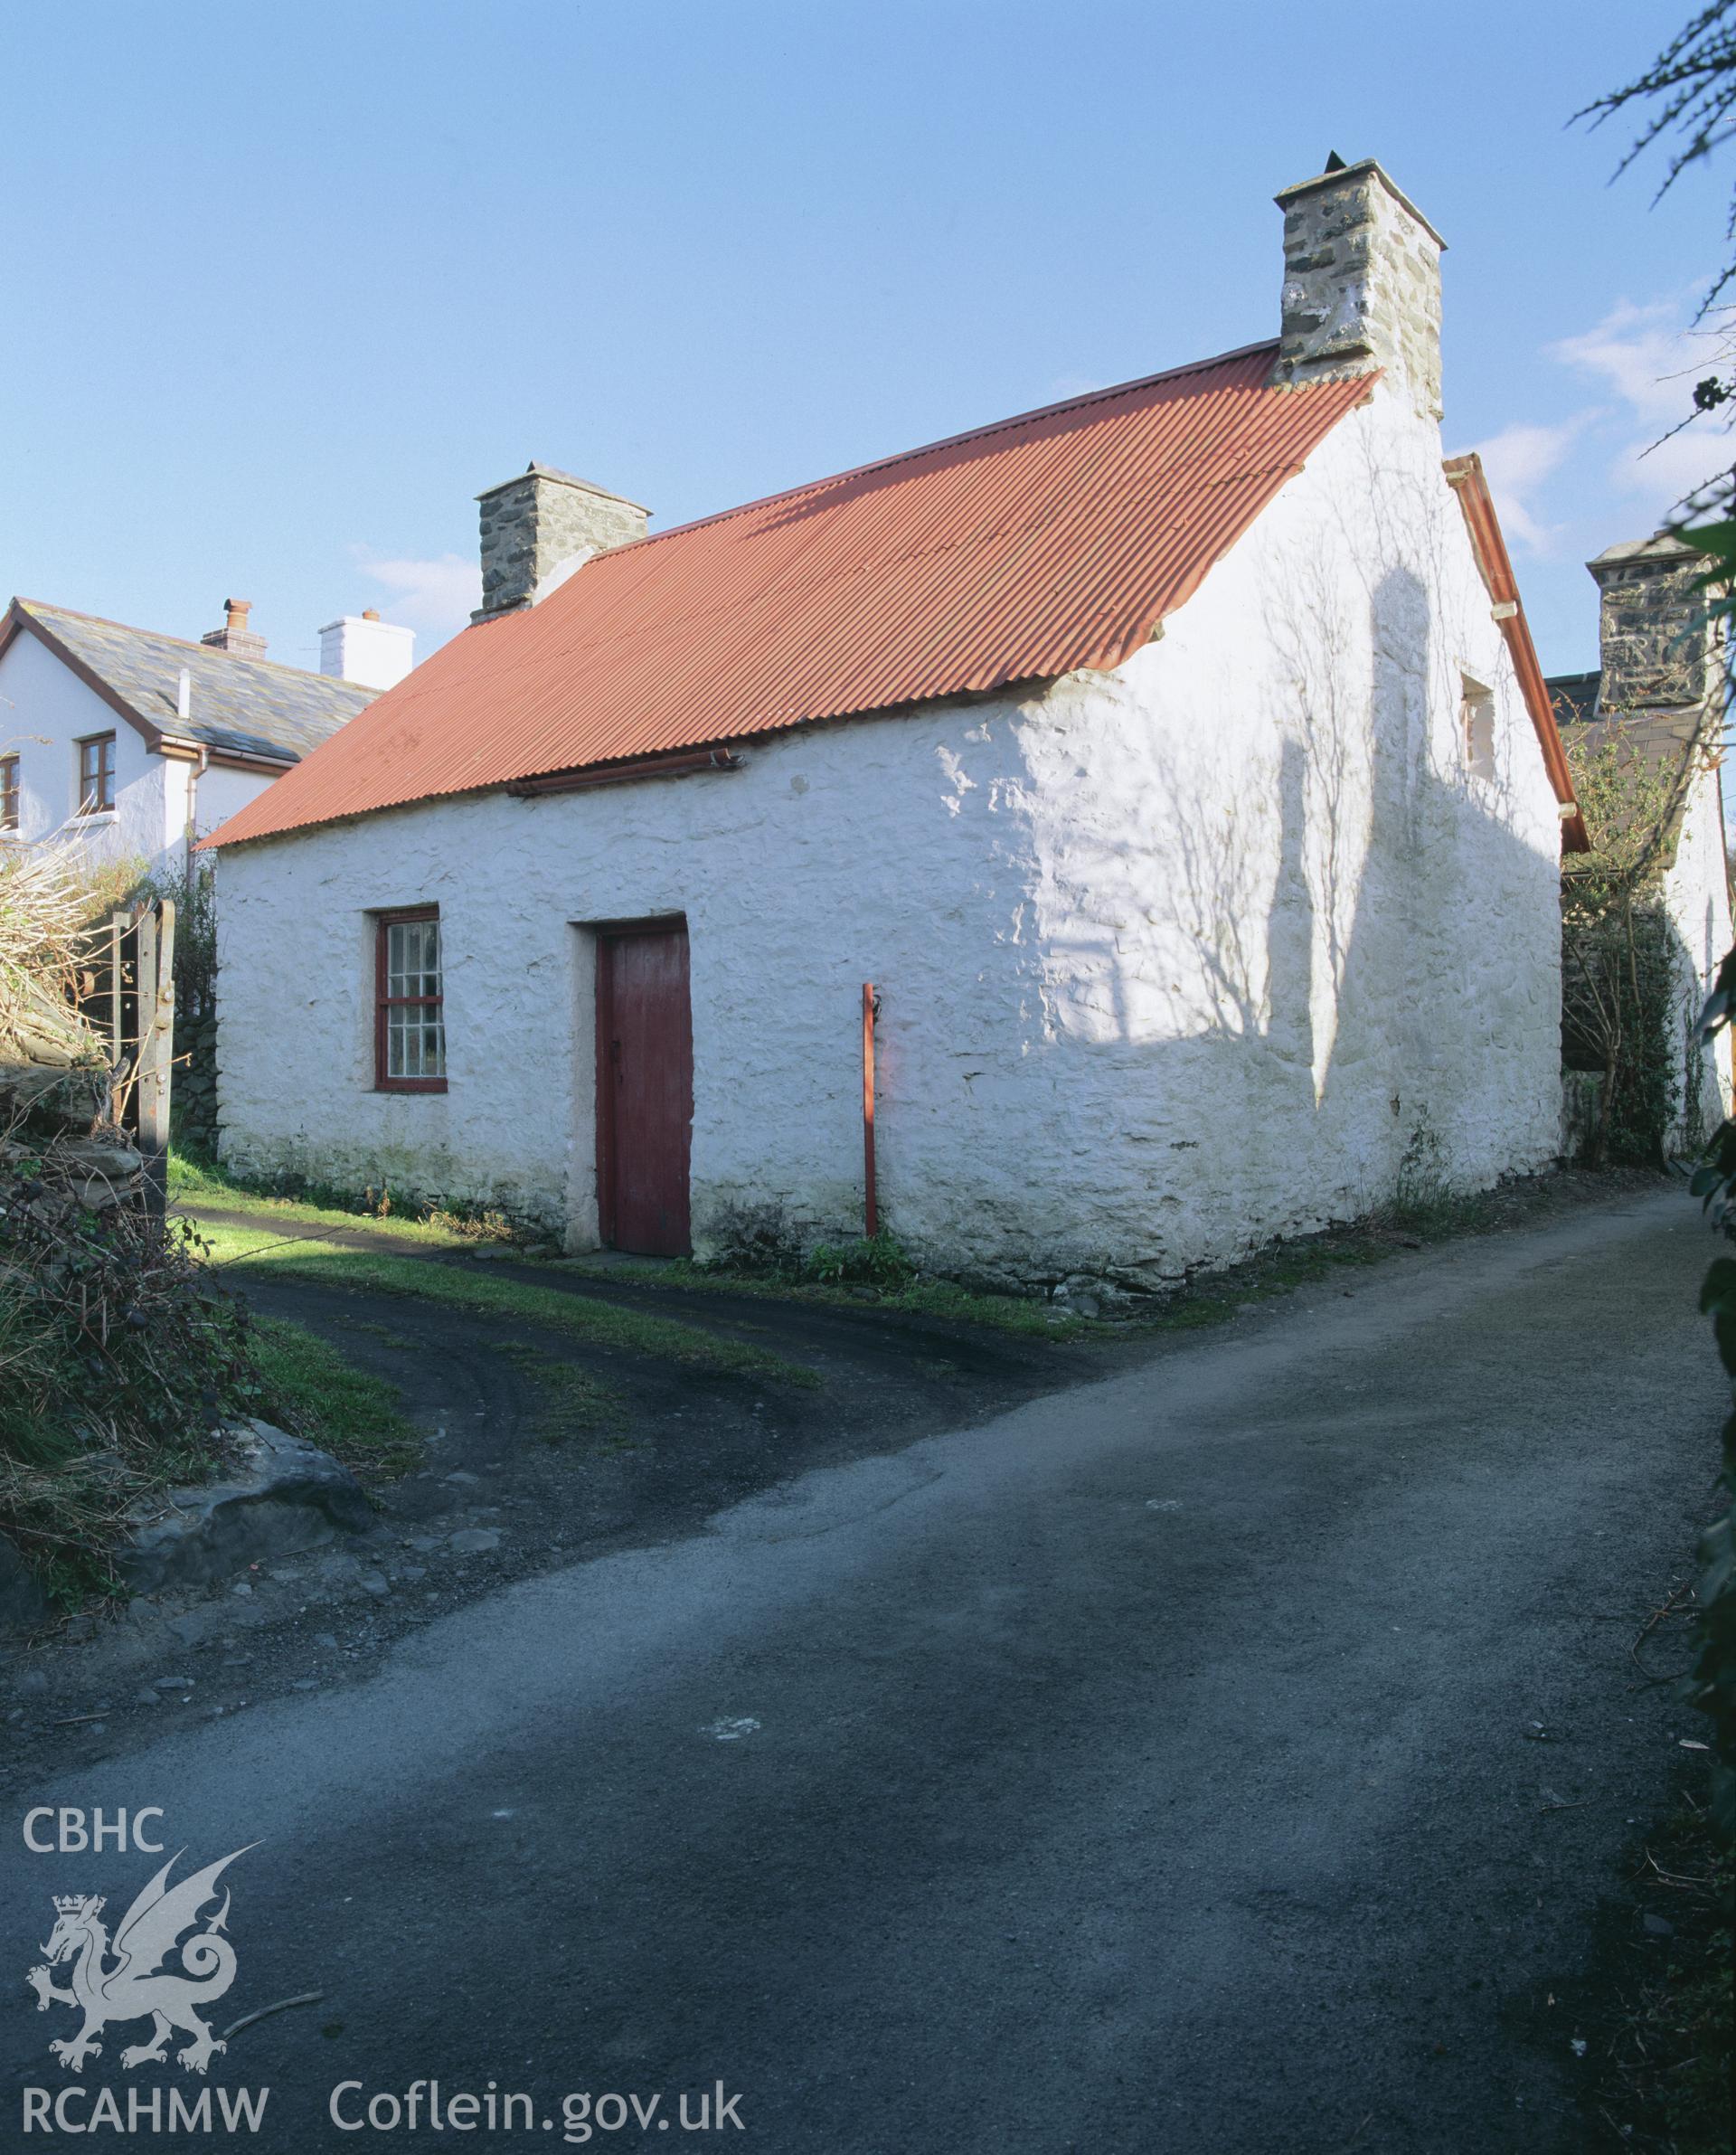 RCAHMW colour transparency showing exterior view of Welsh Cottage, Llanon